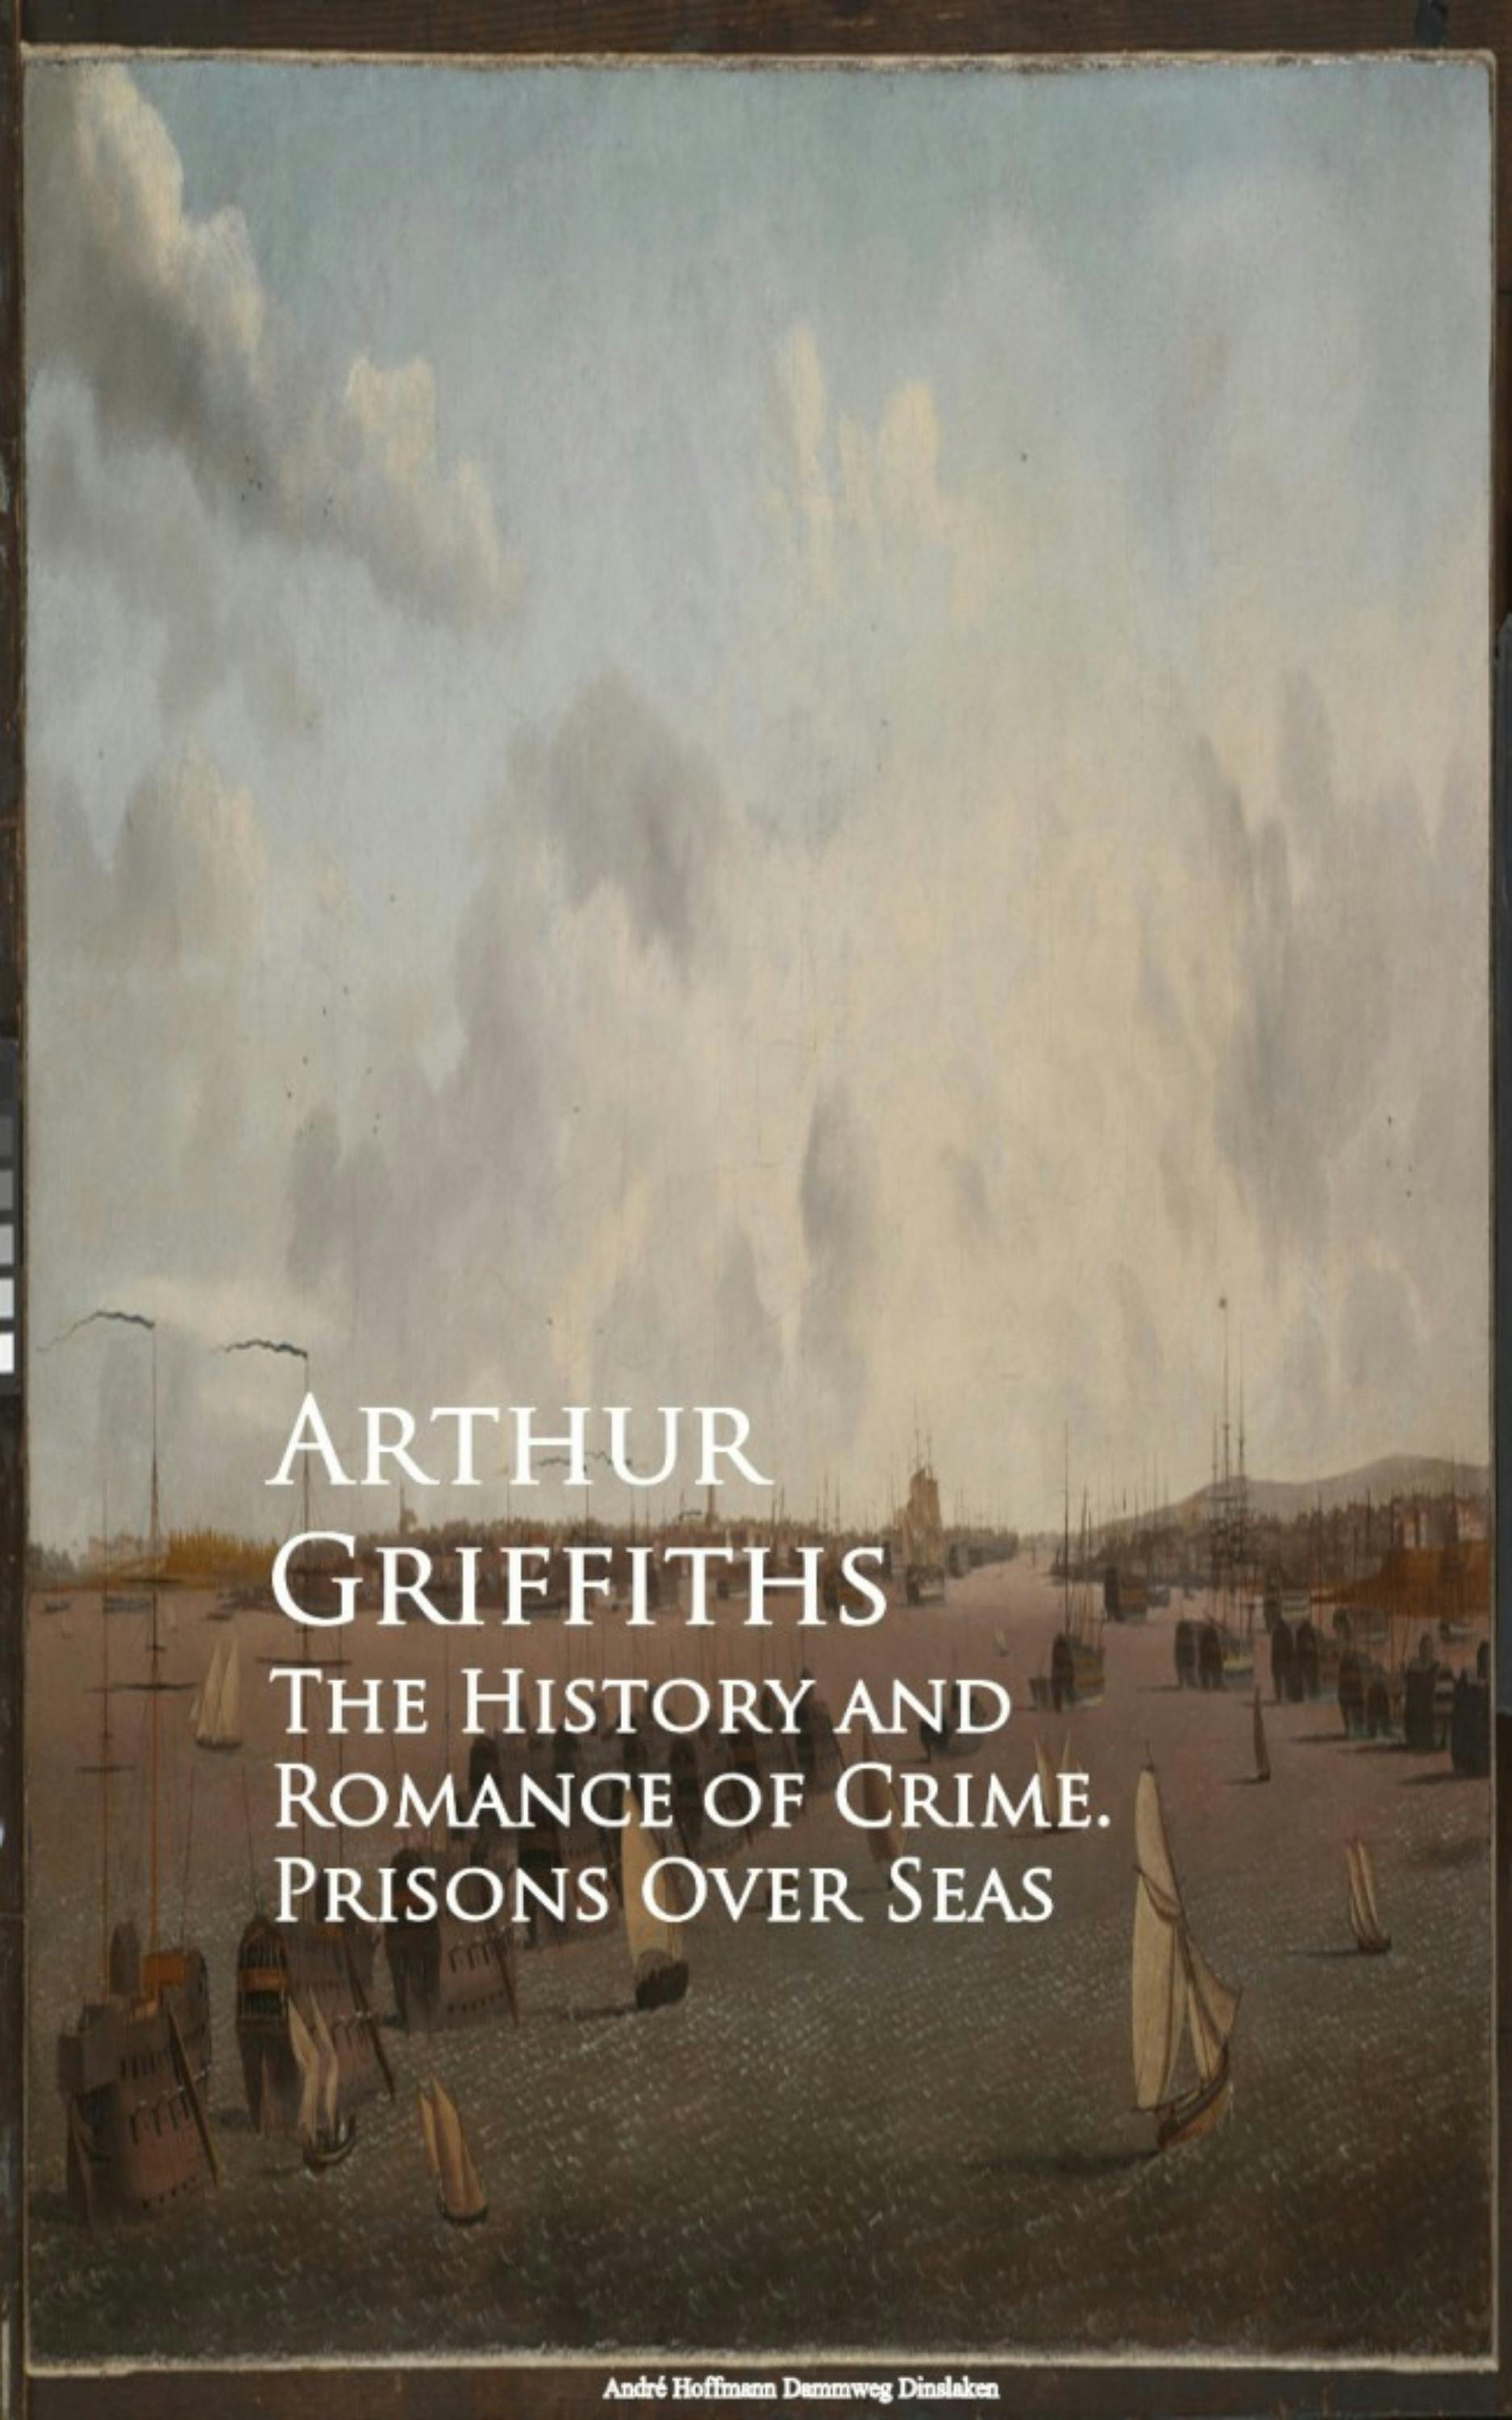 The History and Romance of Crime. Prisons Over Seas - Arthur Griffiths